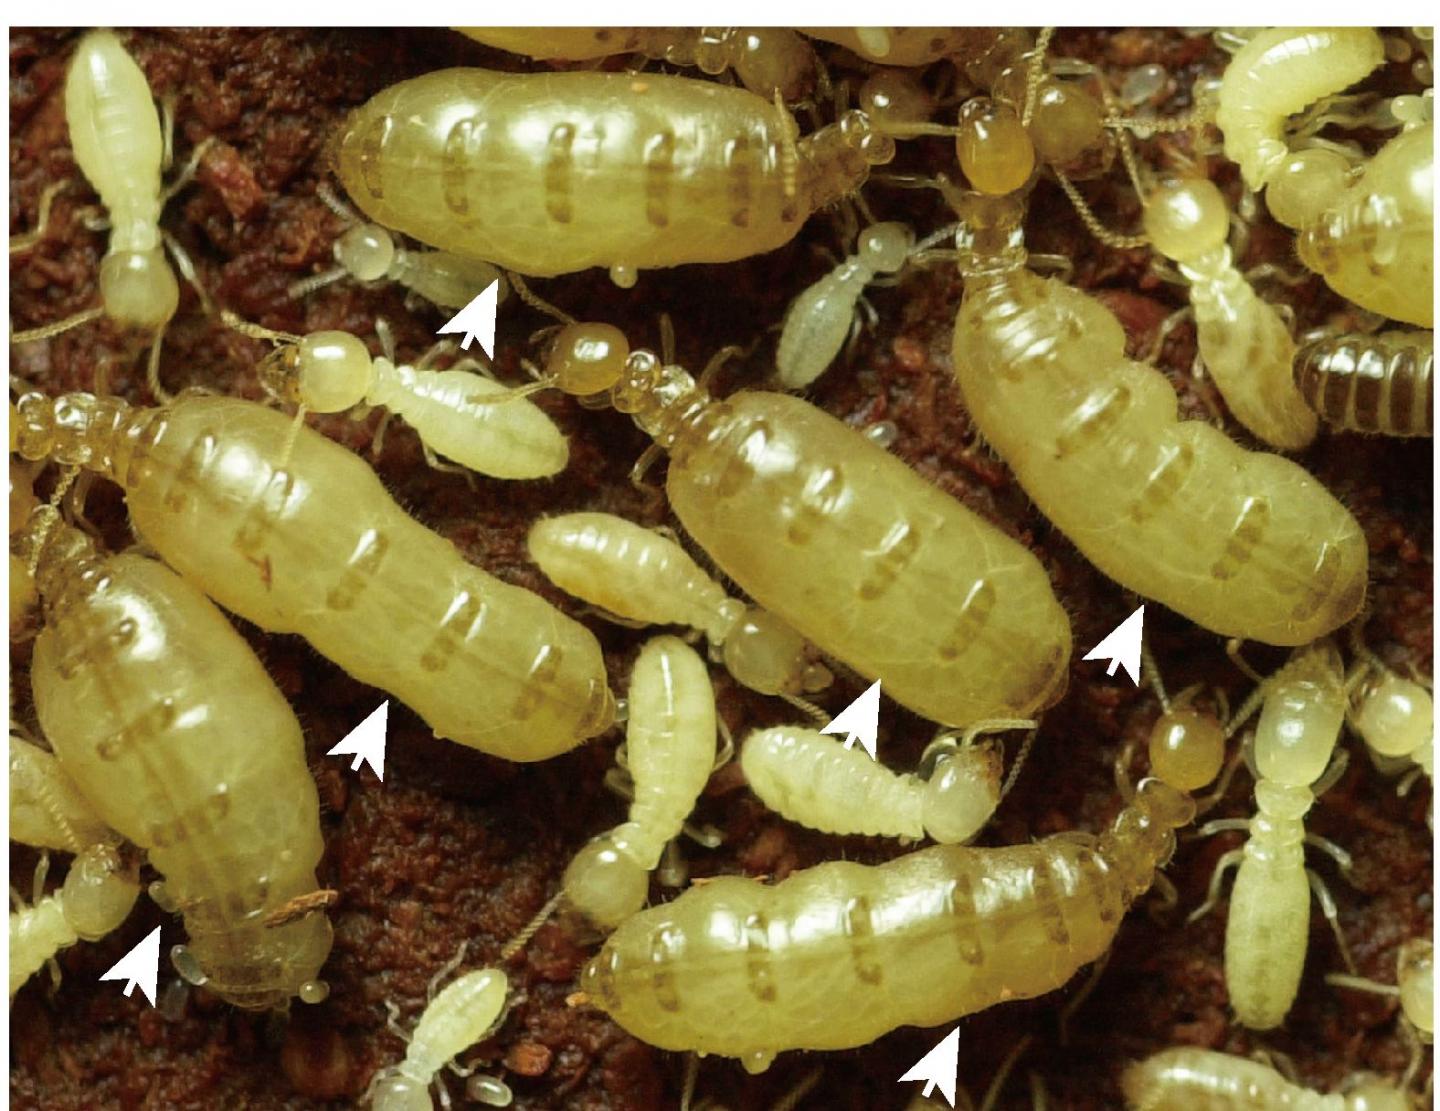 Termite Queens' Efficient Antioxidant System May Enable Long Life